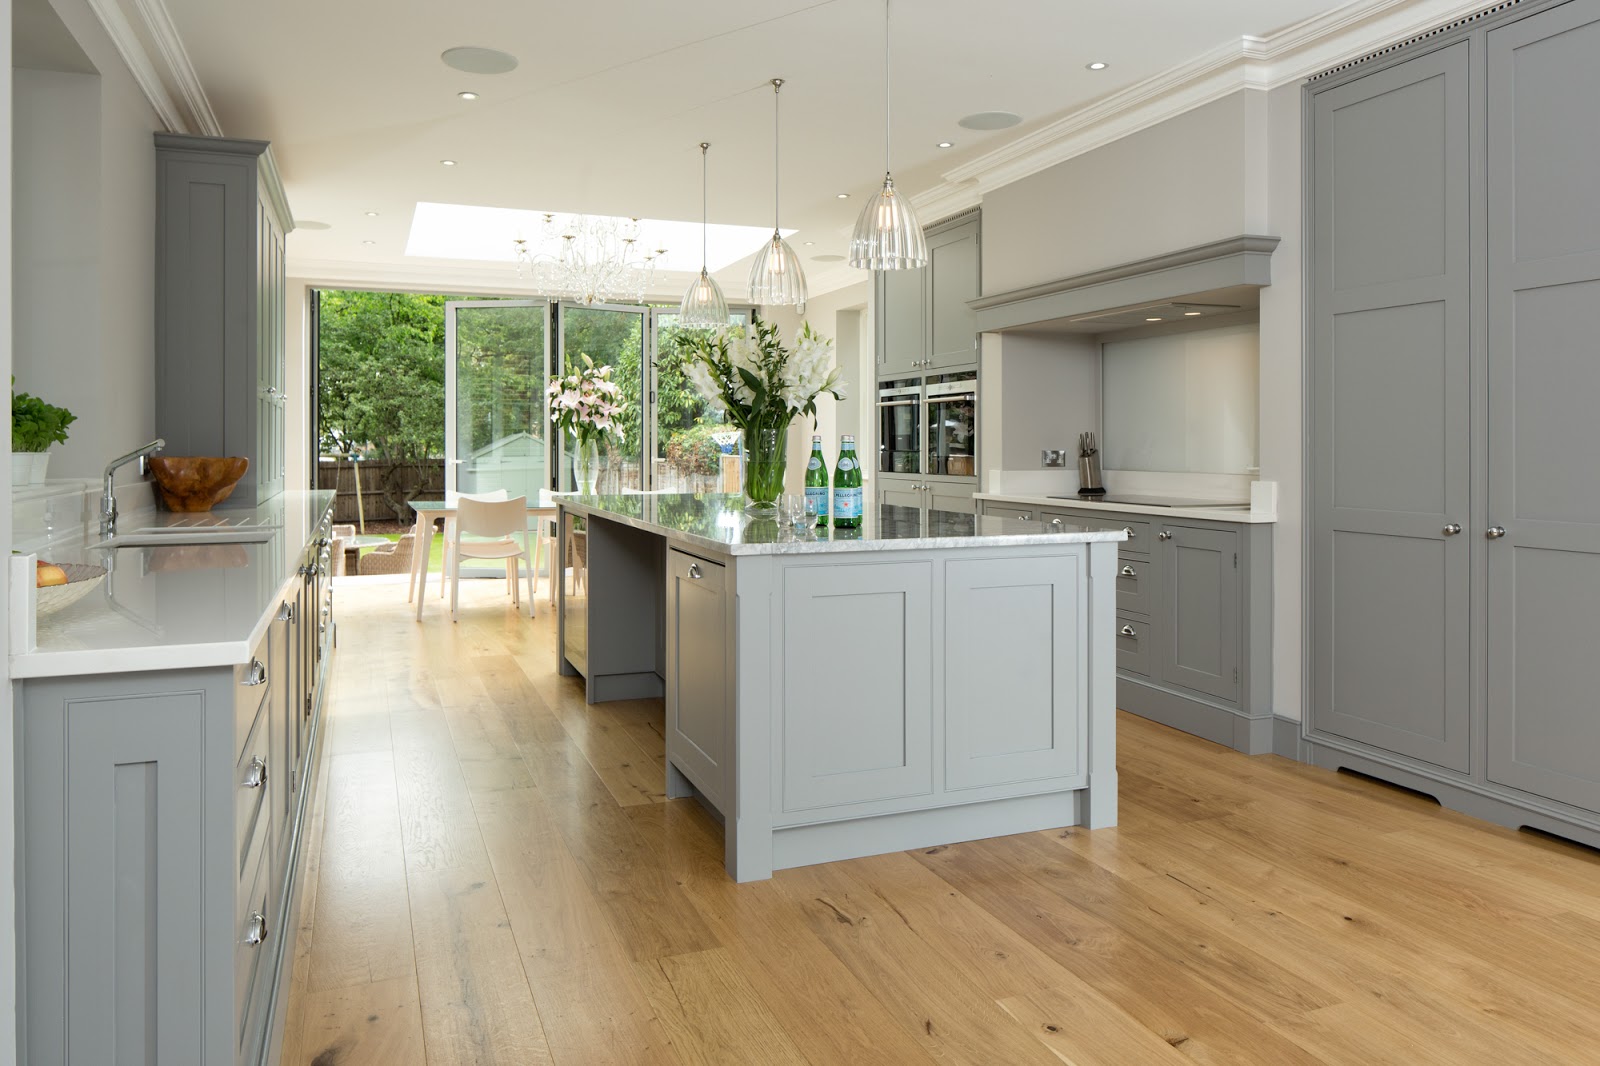 Gorgeous Grey and White Kitchens that Get Their Mix Right